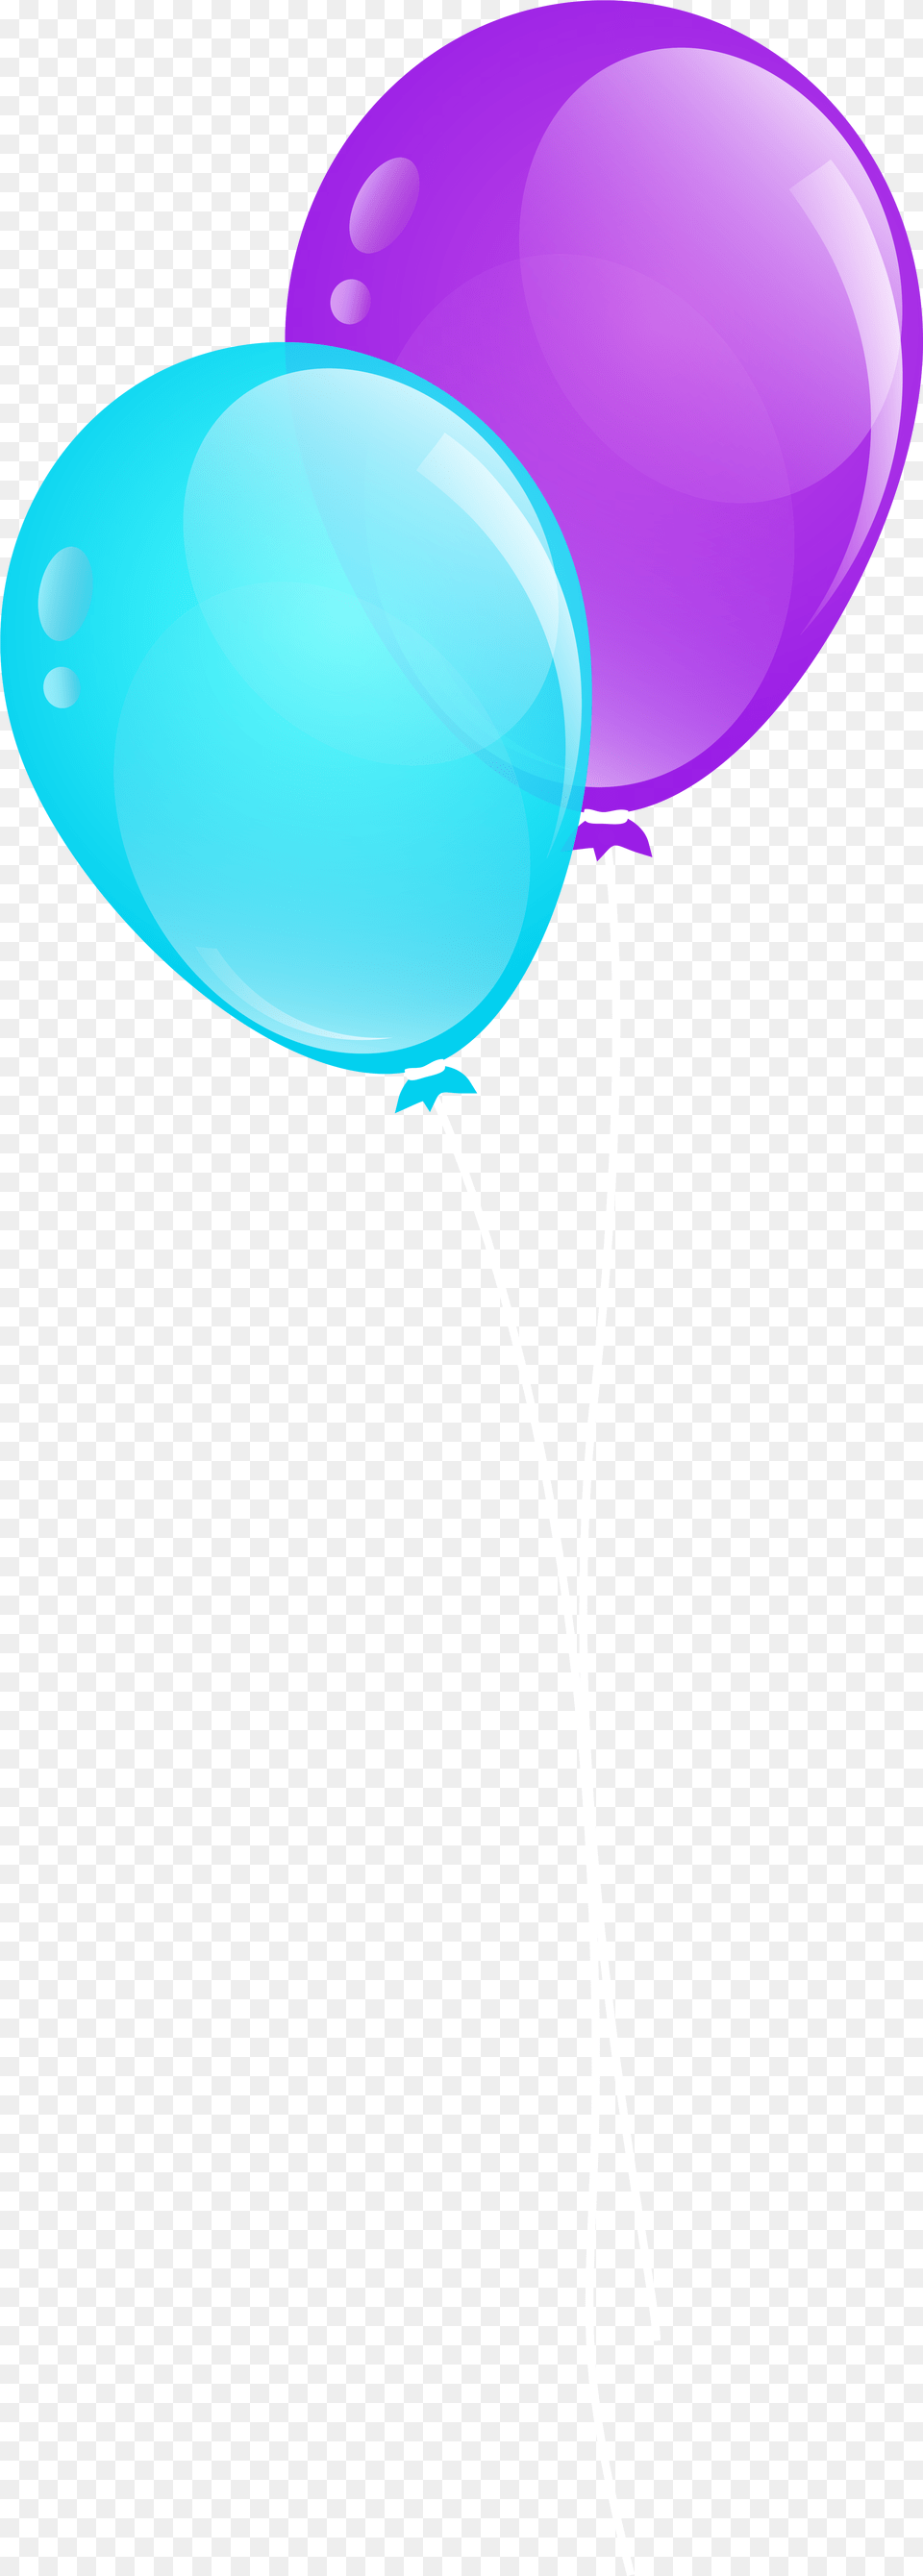 Download Hd Blue And Purple Balloons Clip Art Purple Blue And Purple Balloons, Balloon Png Image